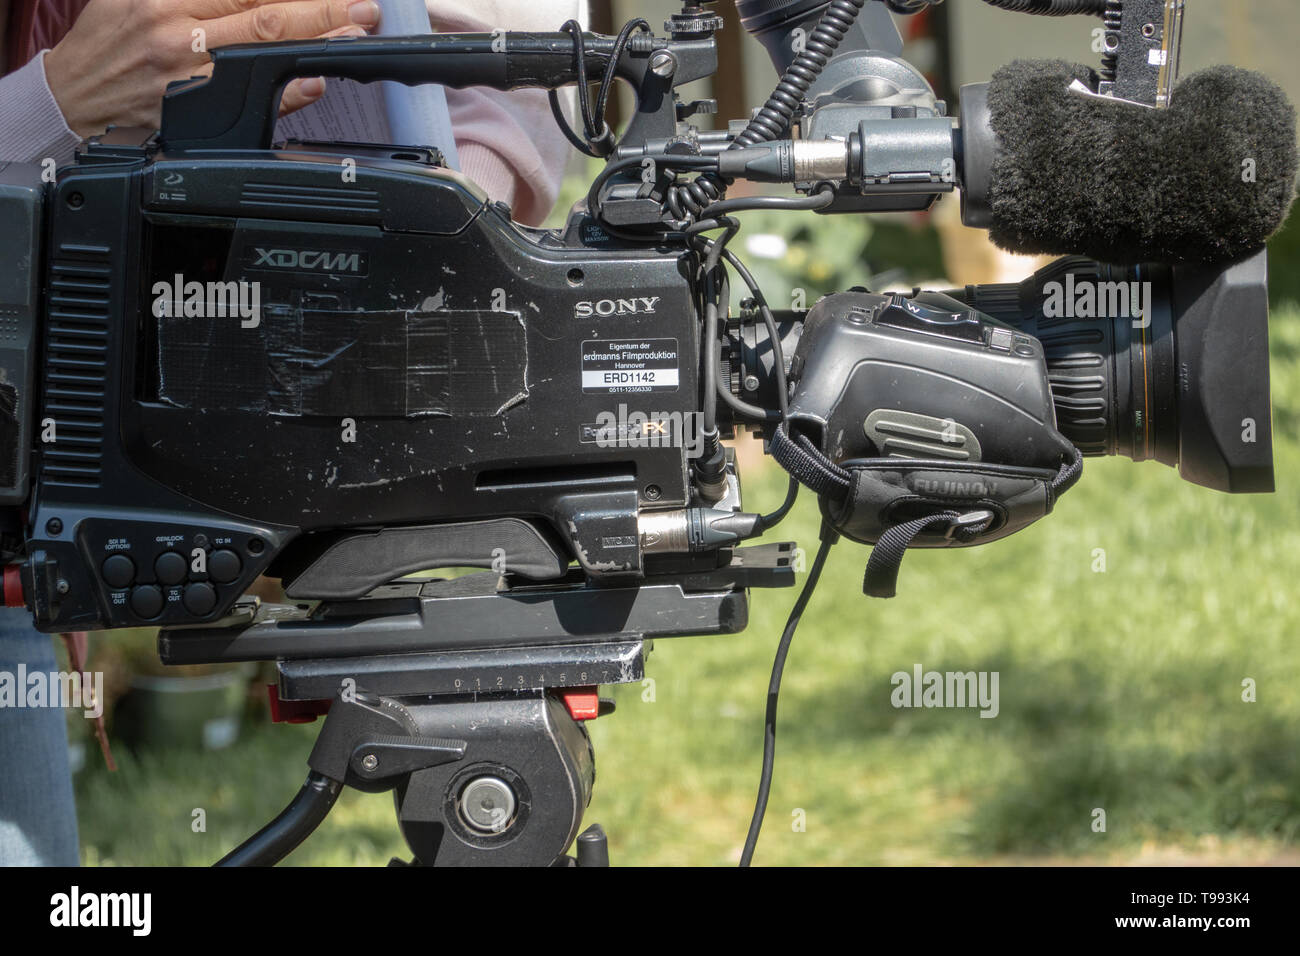 Hannover, Germany, May 12., 2019:Professional video cameras a local television station, old camera with worn out color, including audio system with di Stock Photo